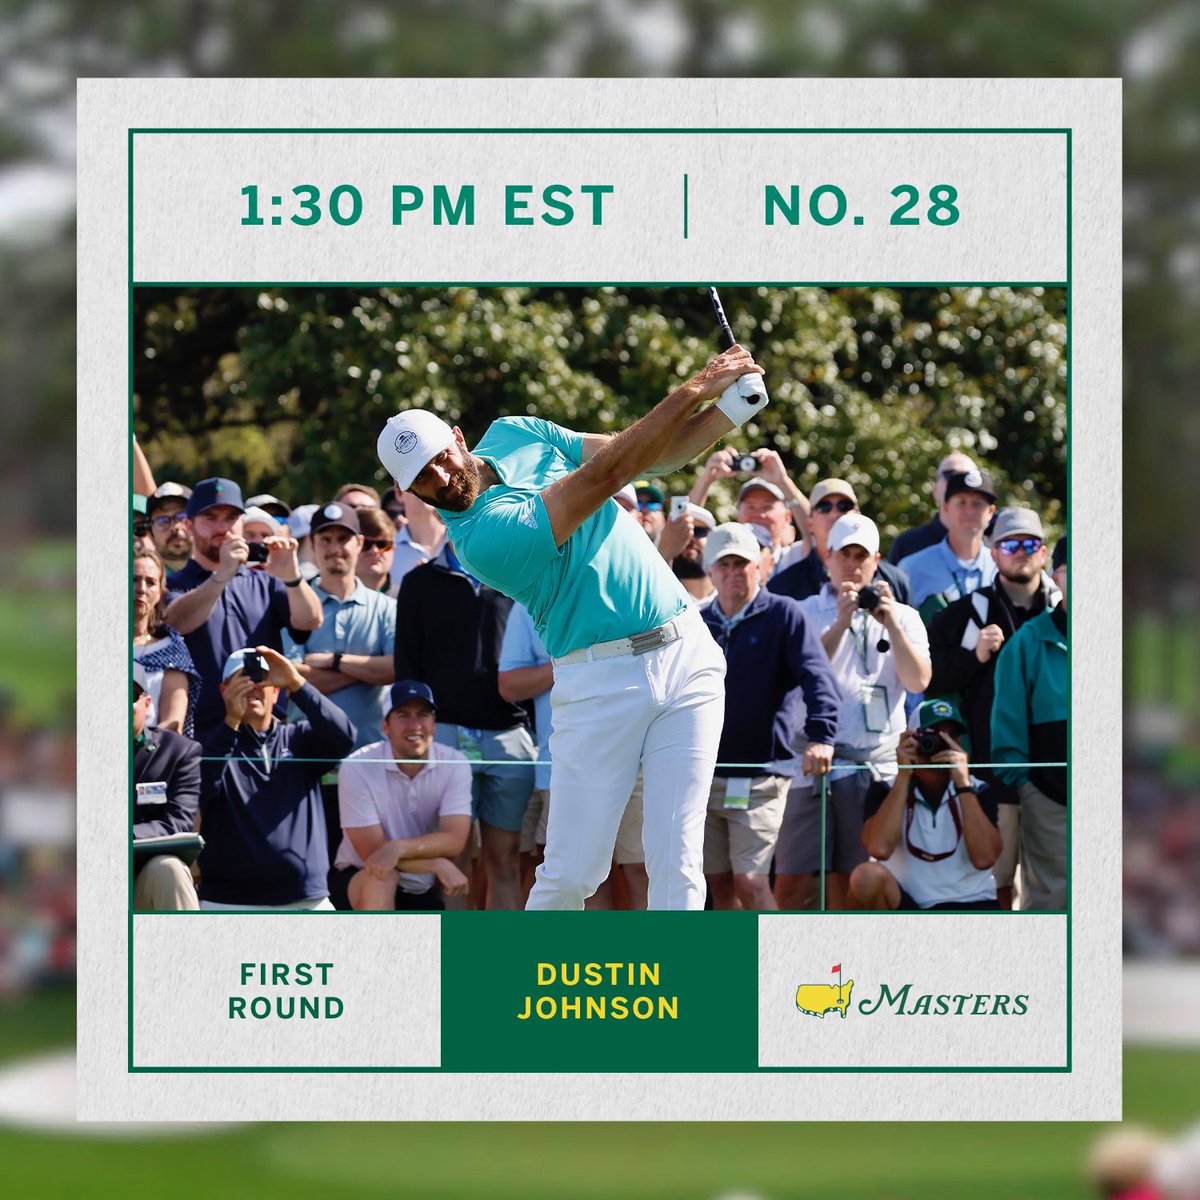 There is no place like Augusta. Excited for this week. #themasters